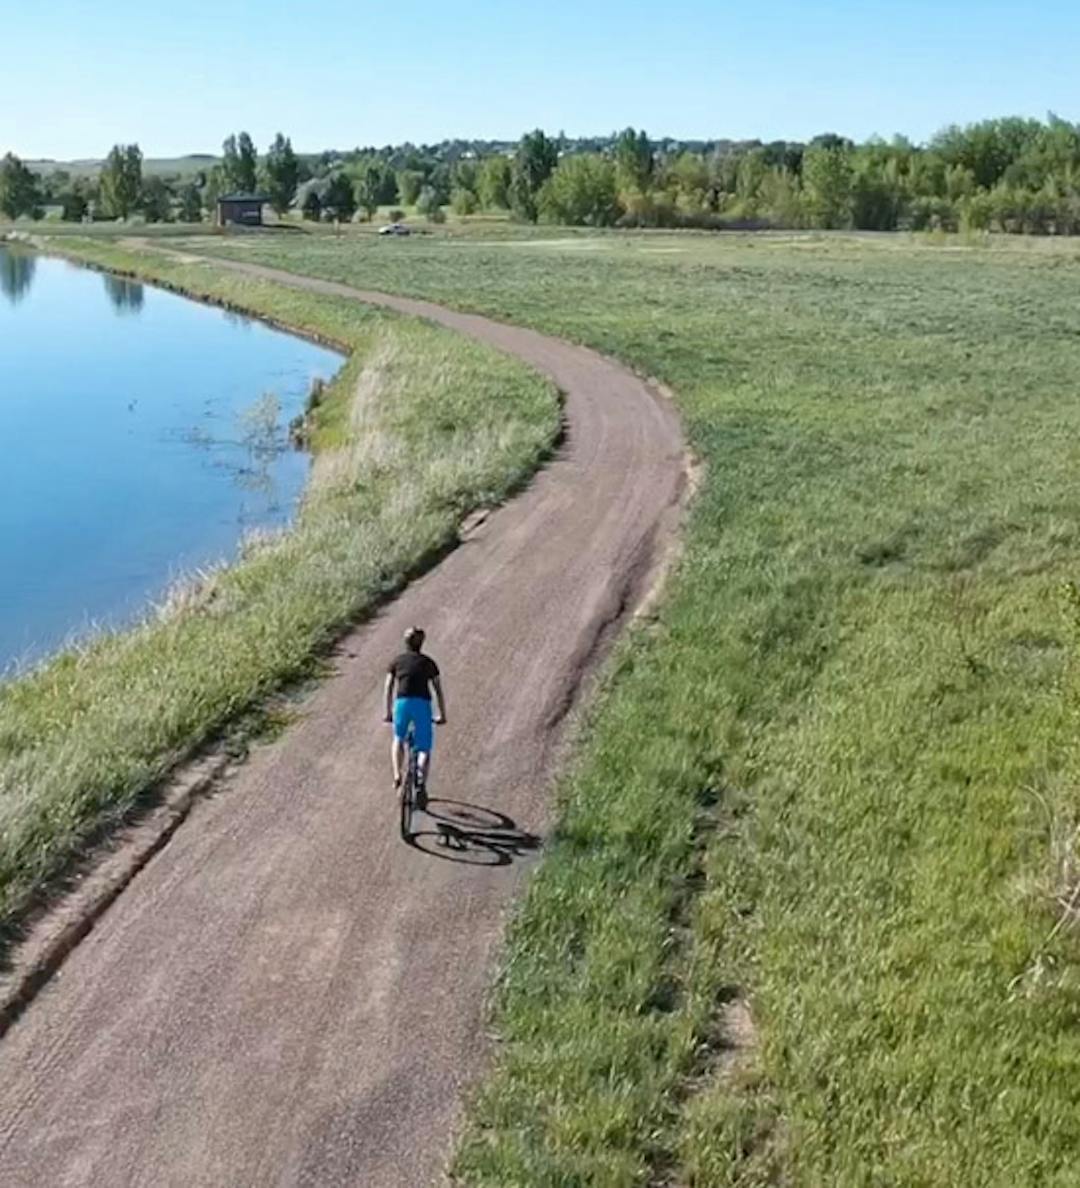 The image shows a man biking on Kyger trail